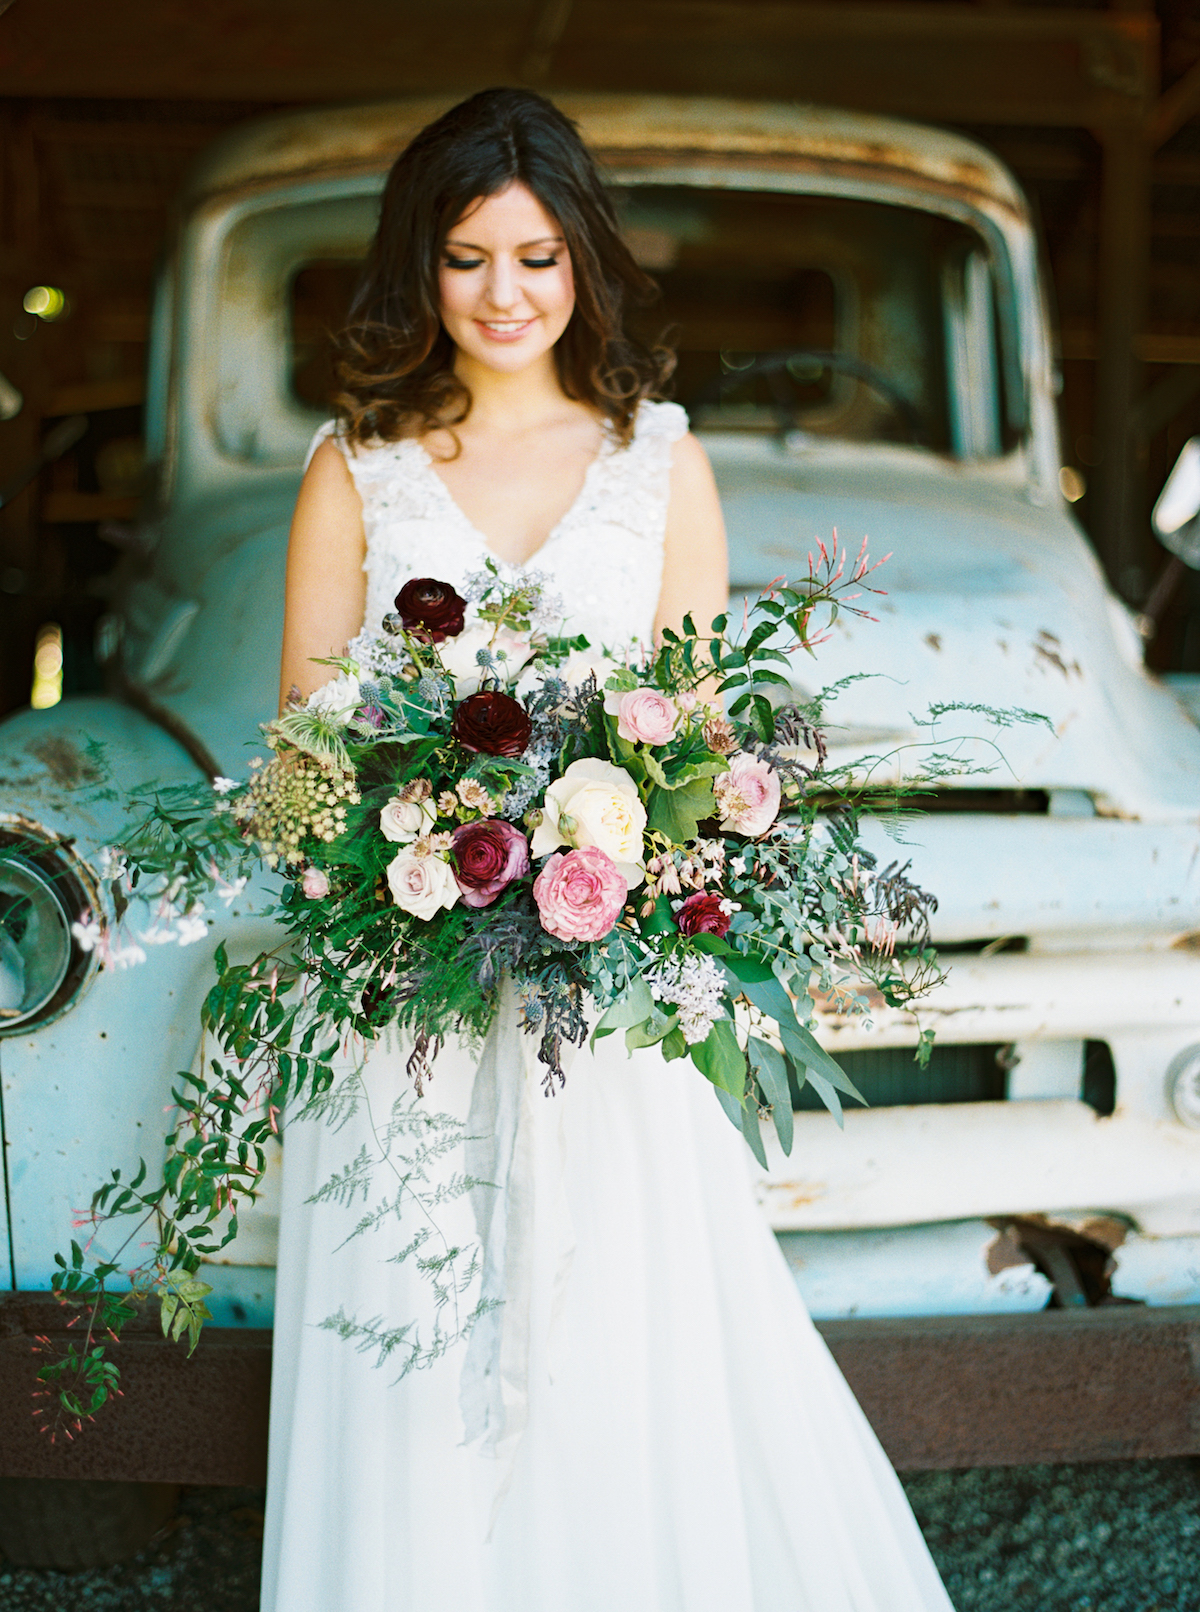 Dreamy bouquet for the Bride with California grown flowers